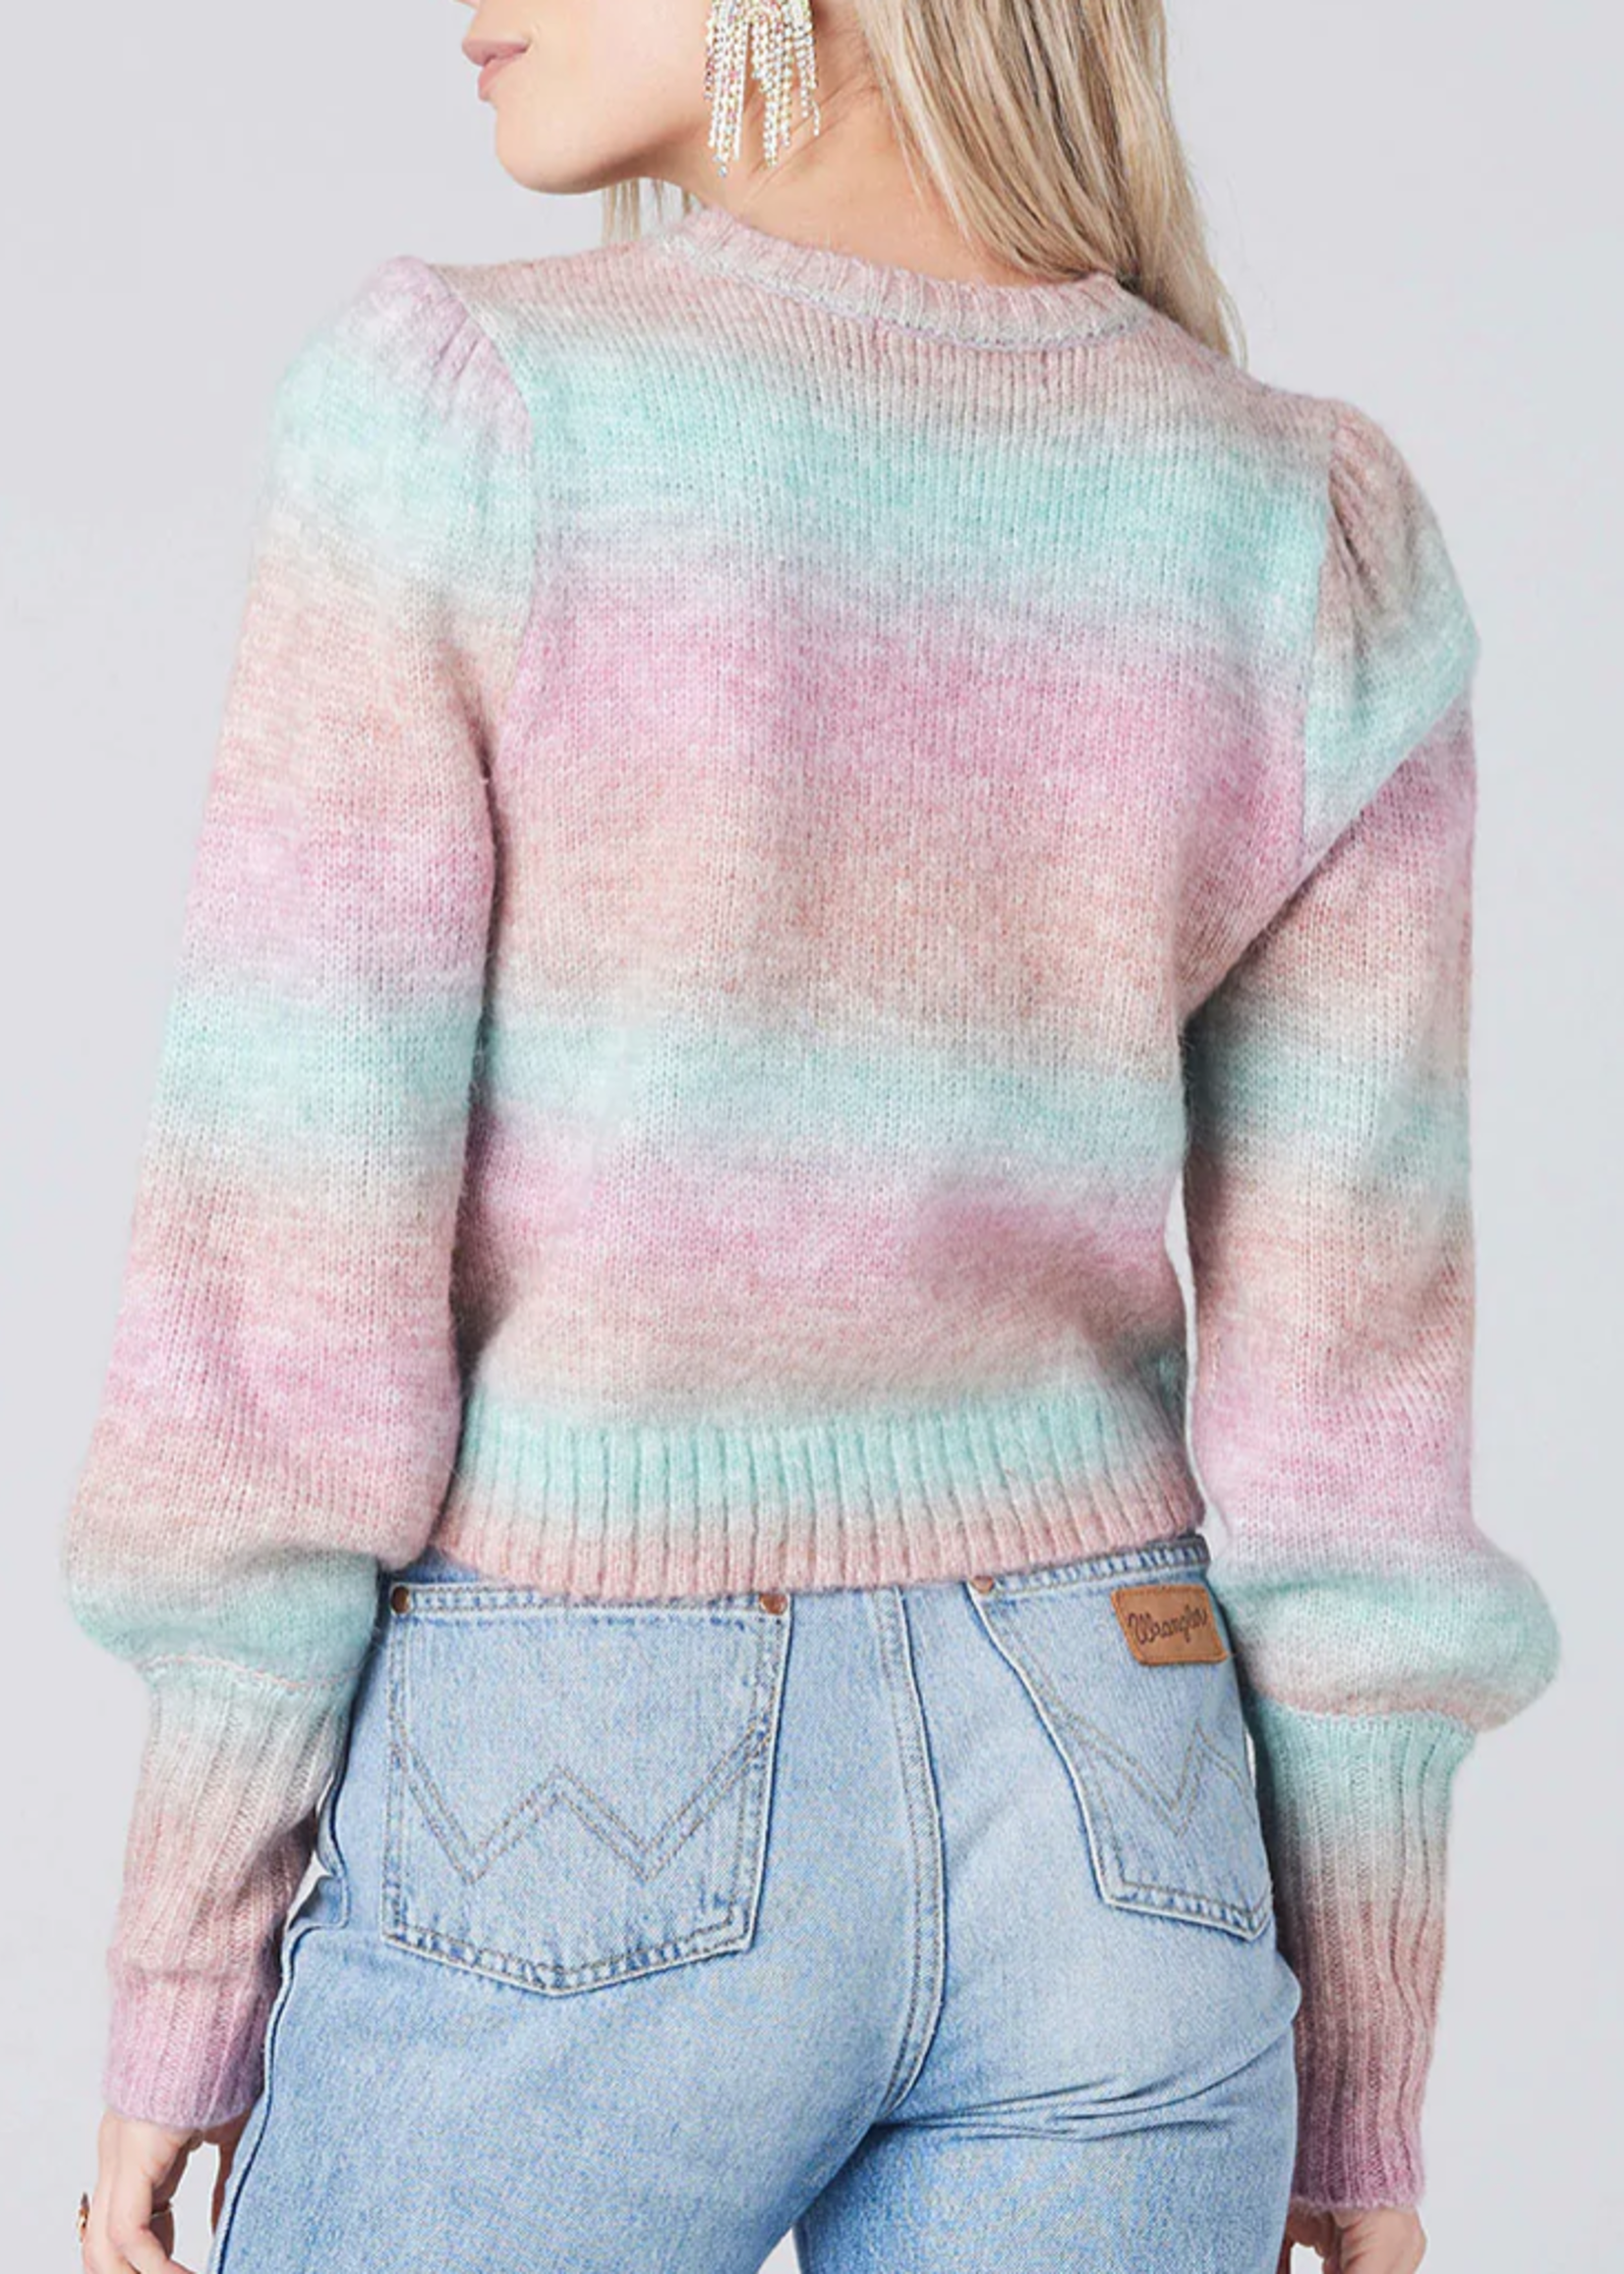 Saltwater Luxe Cotton Candy Puff Sweater